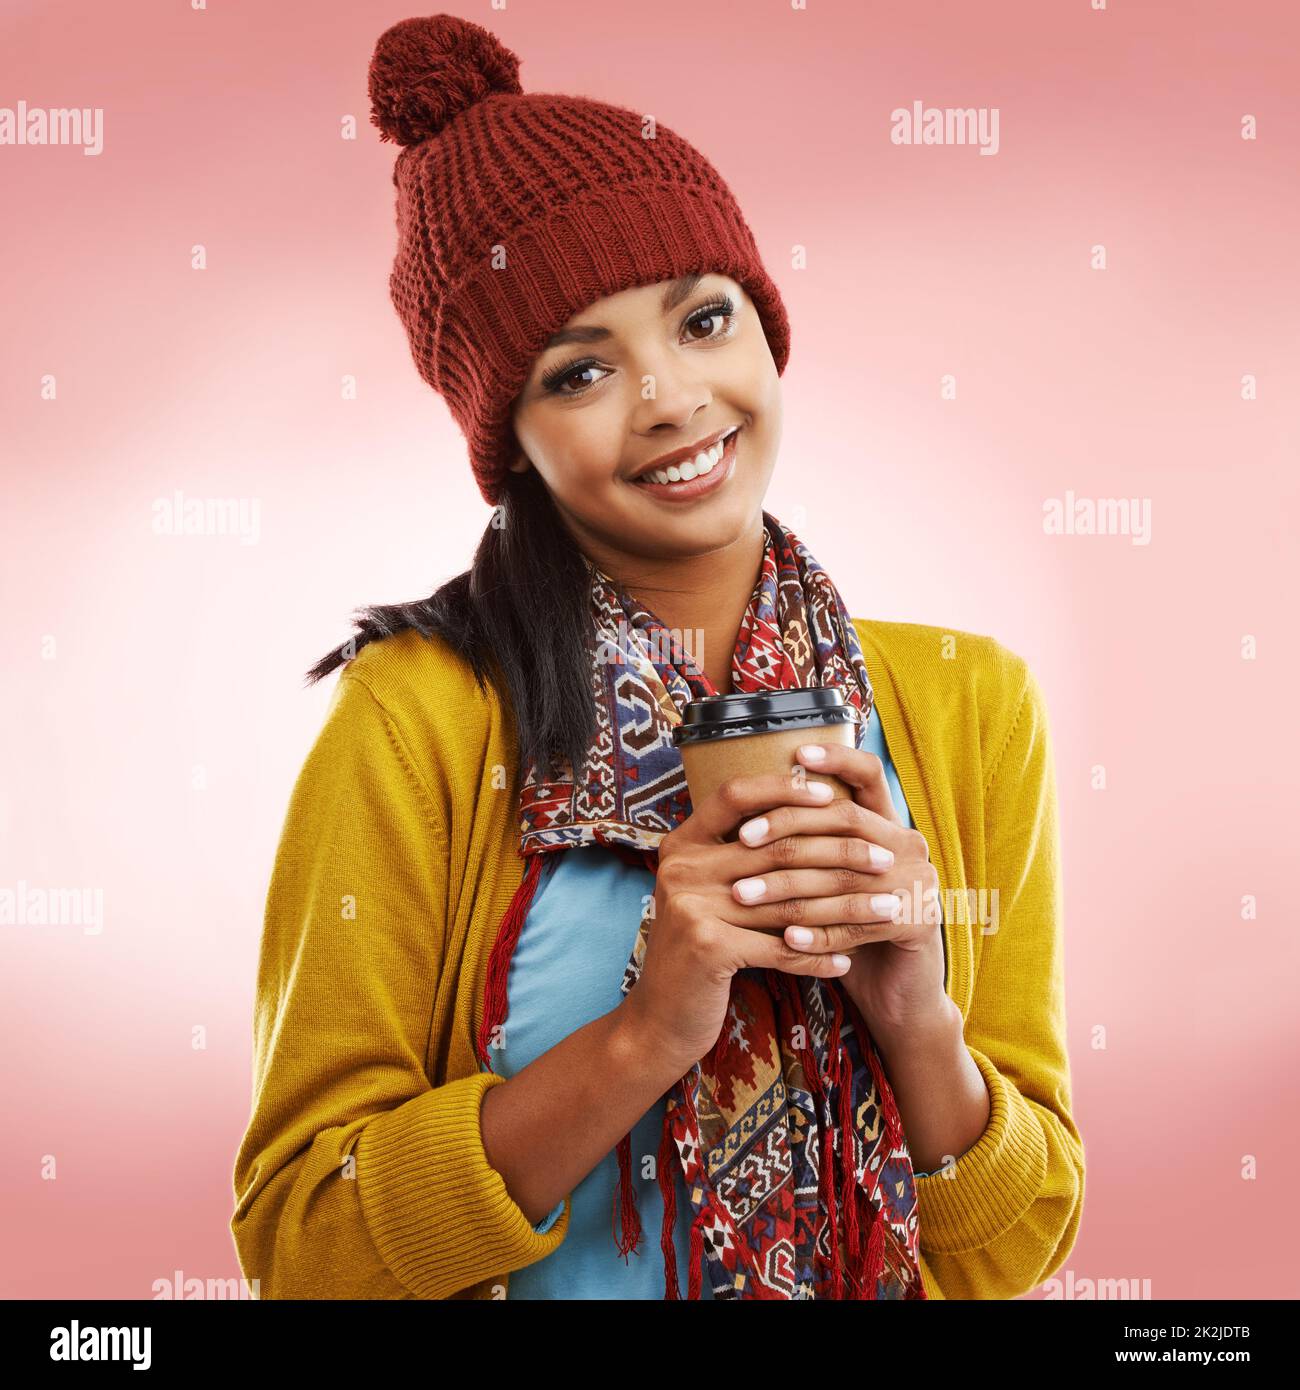 Keep warm this winter. Cropped portrait of a young woman posing in winter wear. Stock Photo